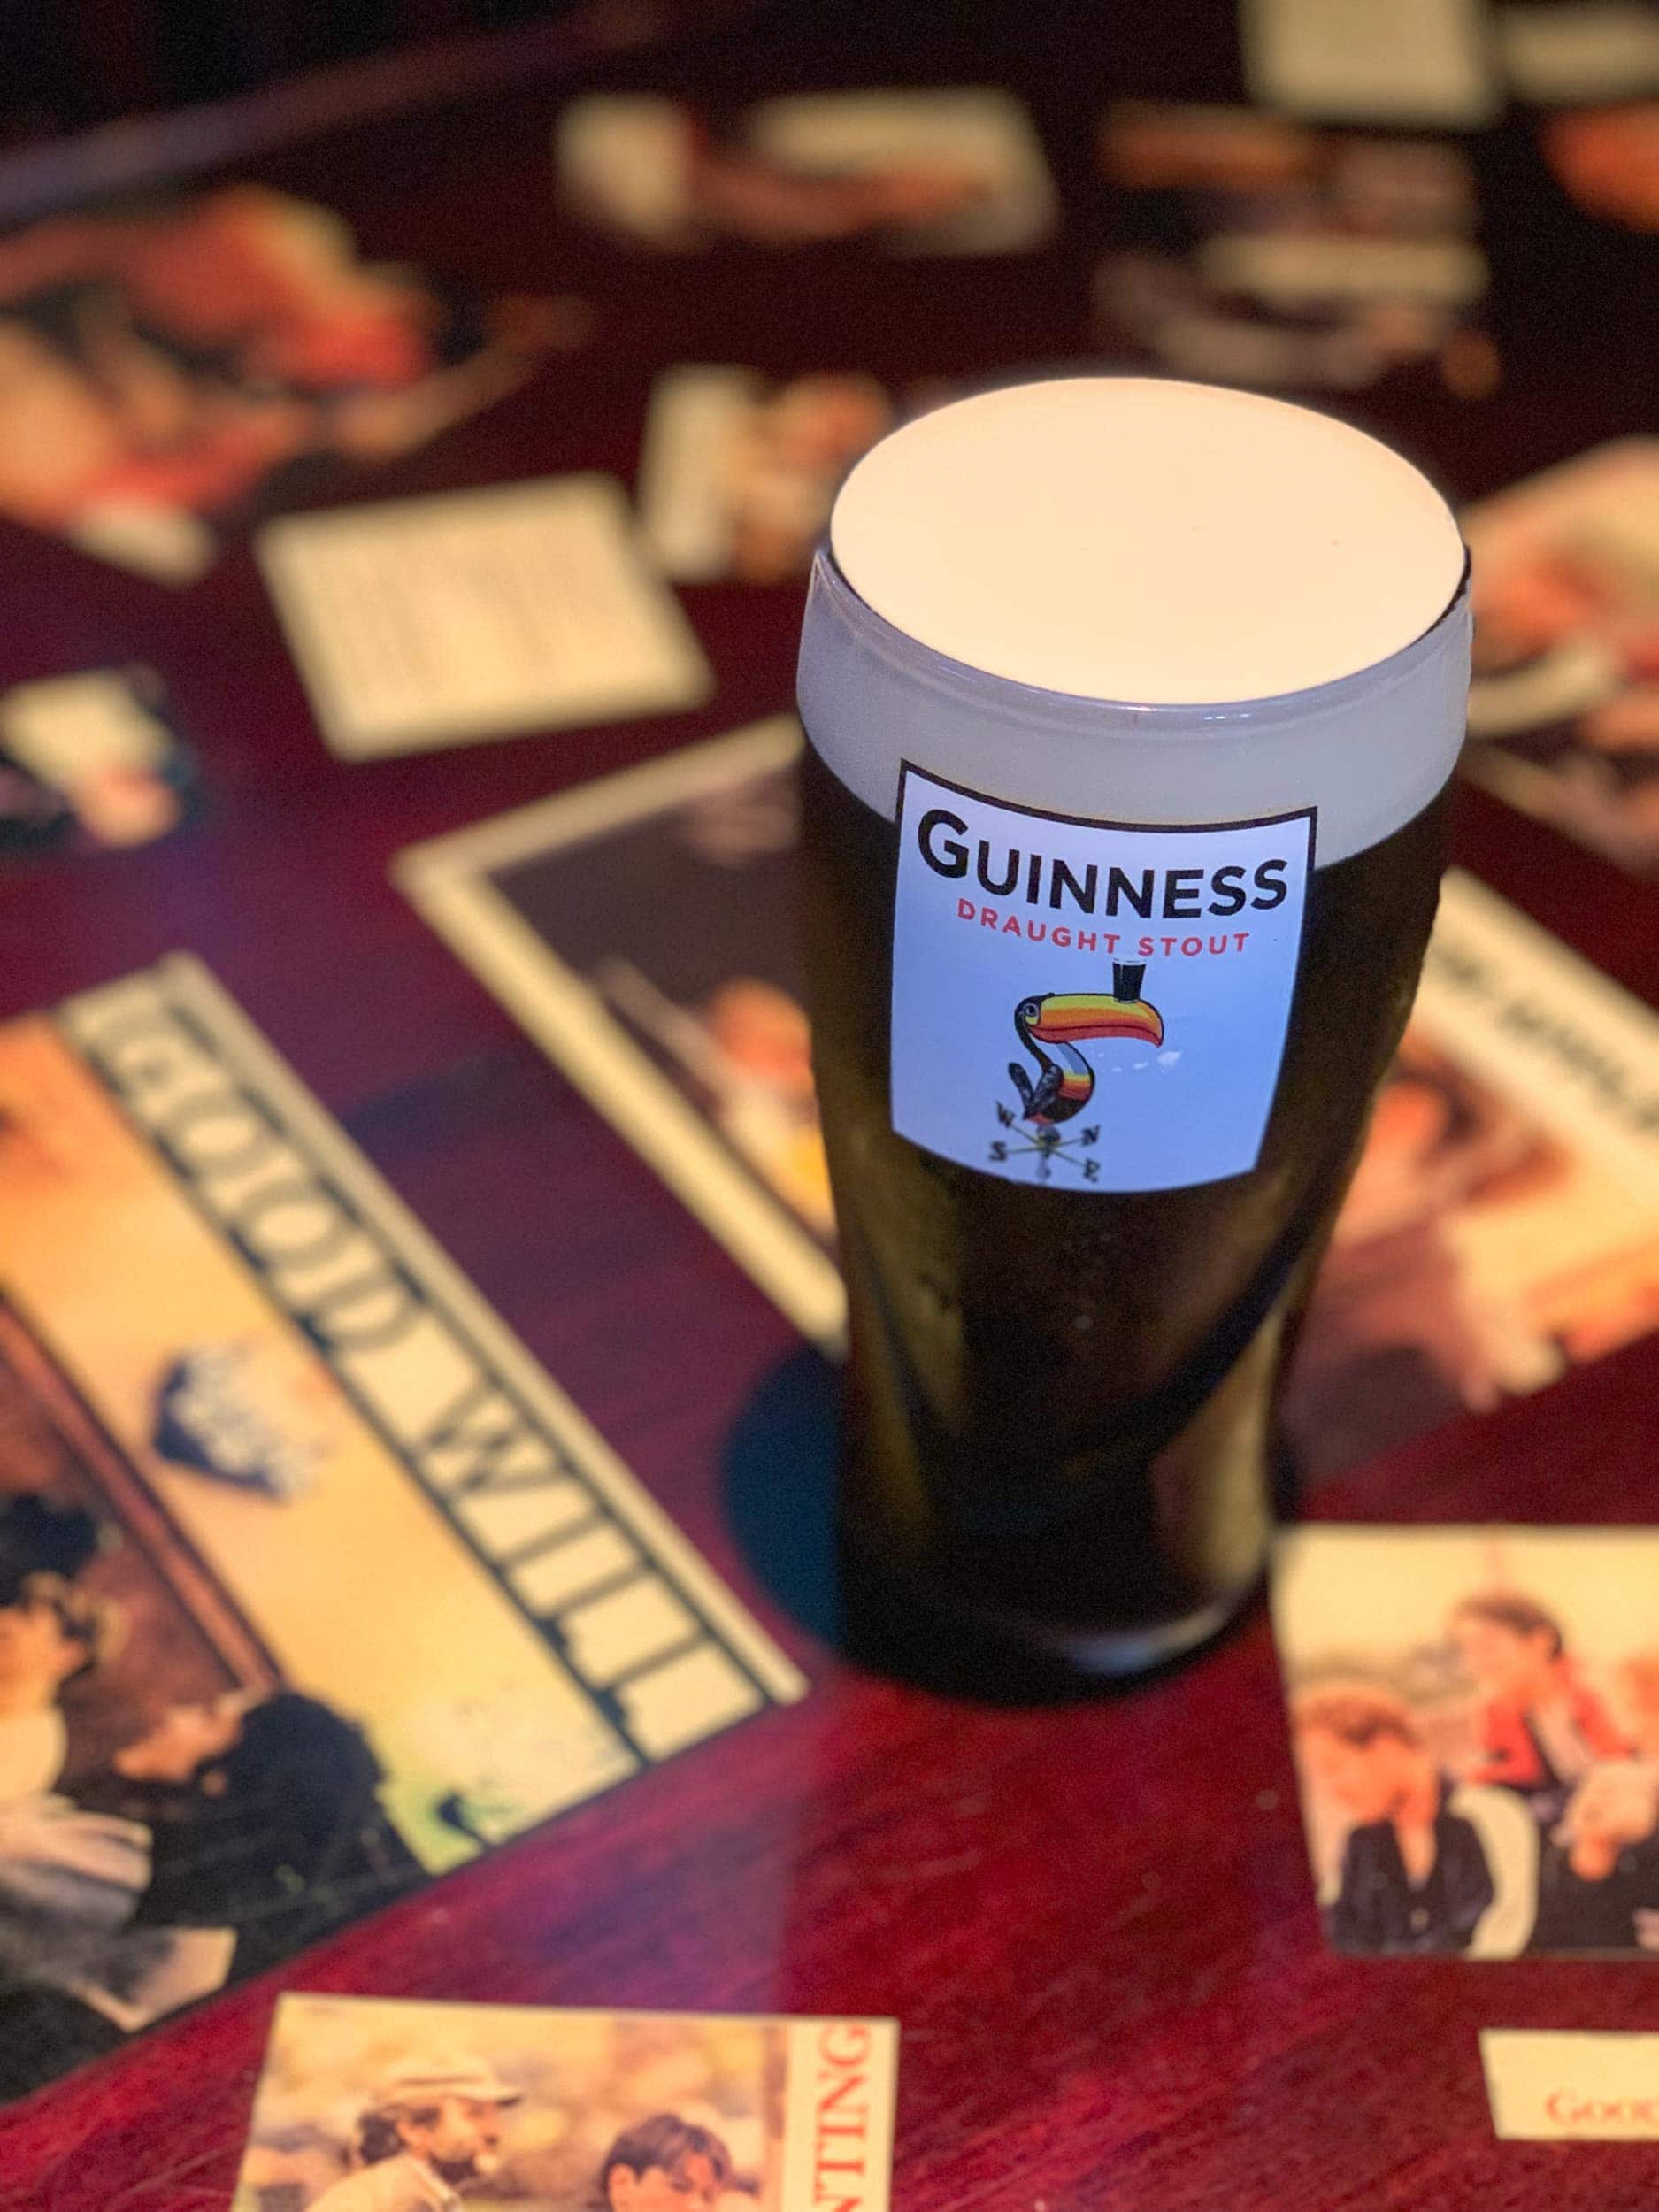 Guinness at L Street Tavern, where Good Will Hunting was filmed.